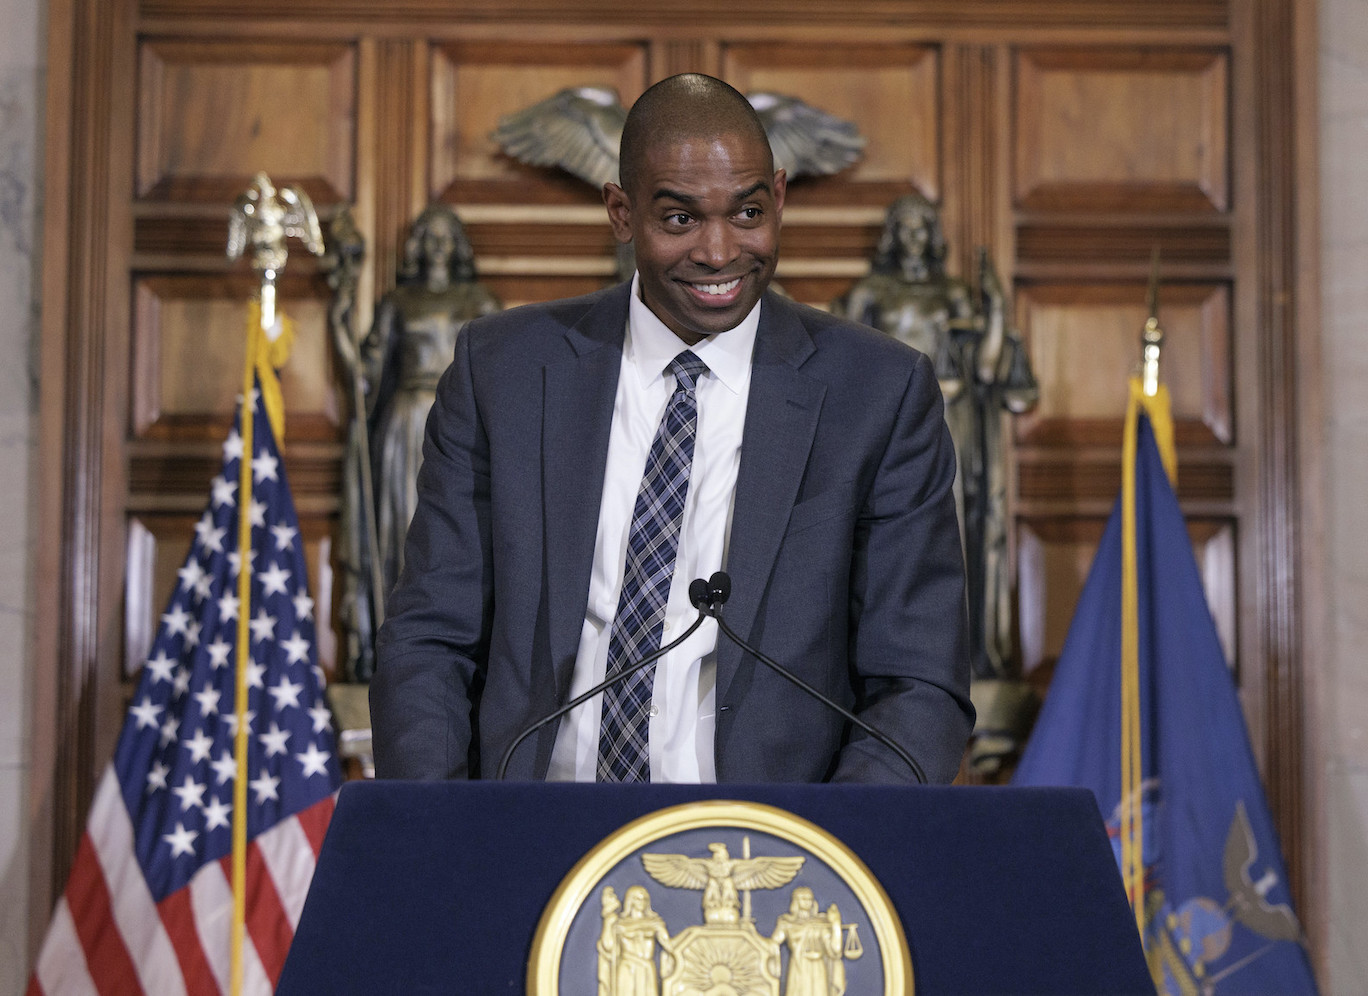 Congressman Antonio Delgado was appointed lieutenant governor. He is shown at a news conference in the Red Room at the State Capitol. (Photo by Mike Groll/Office of Gov. Kathy Hochul)